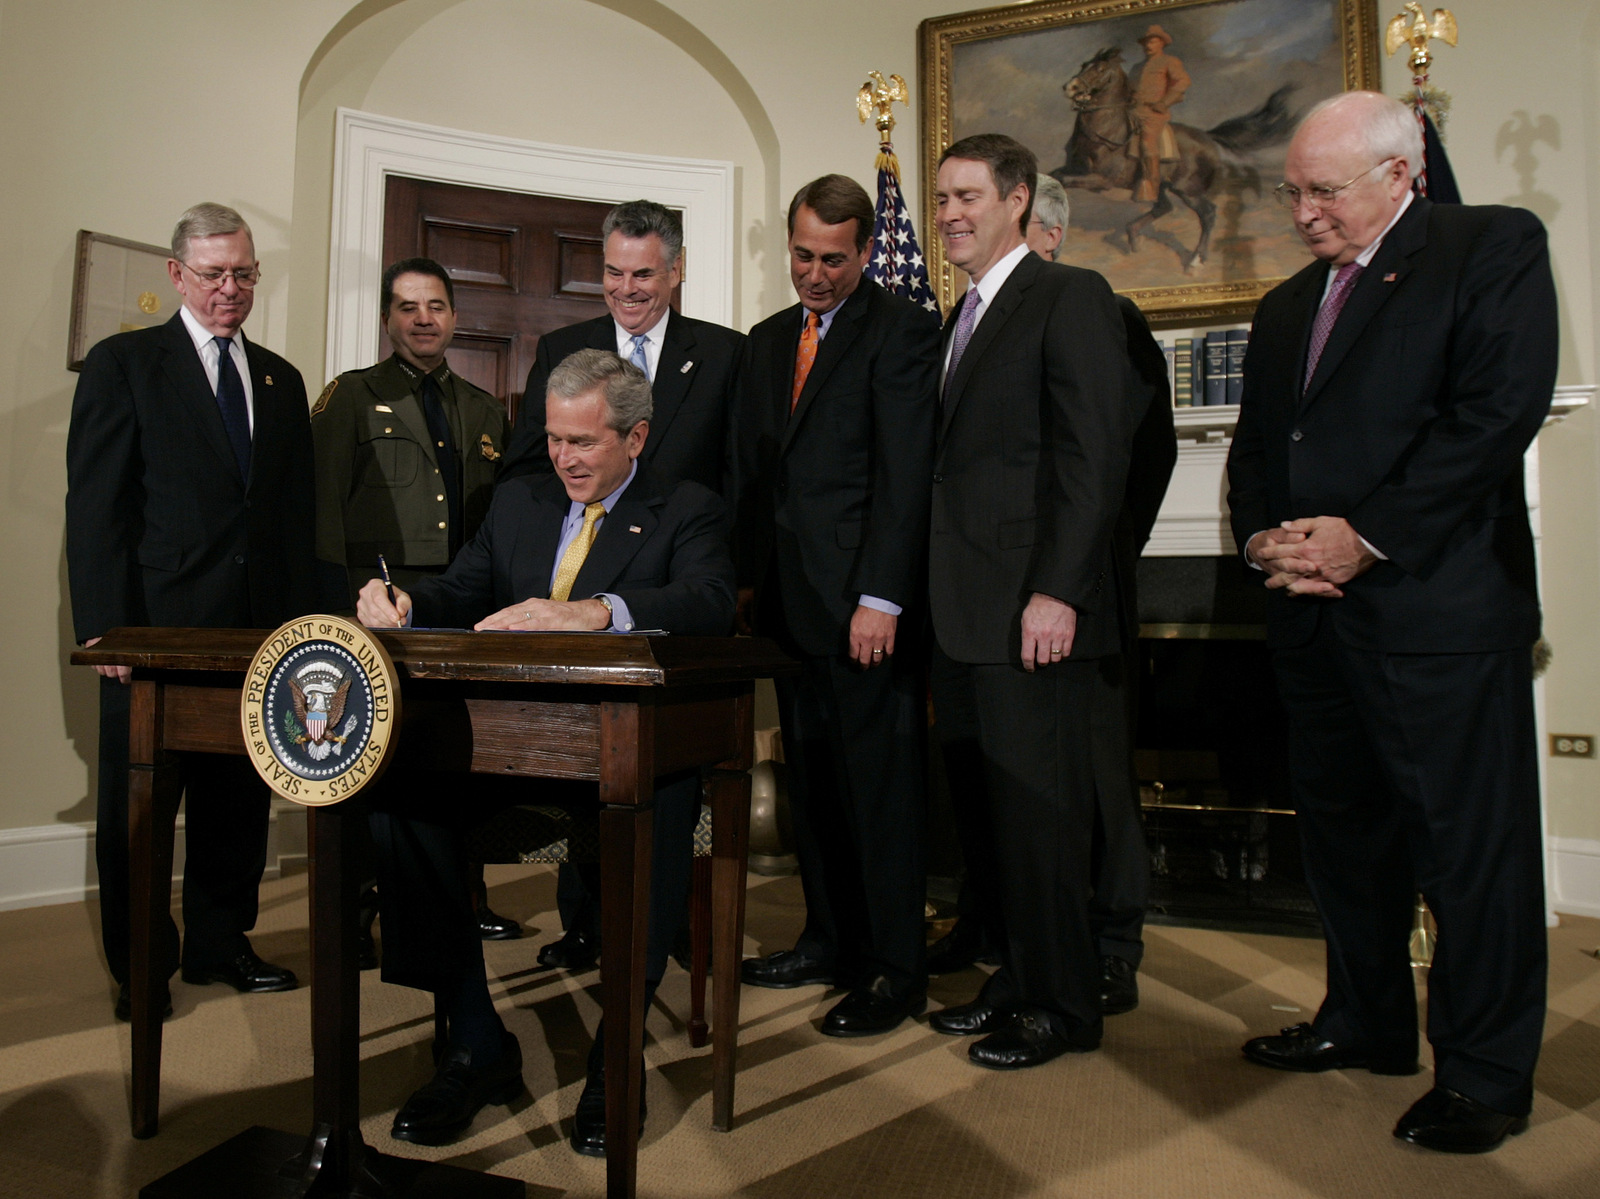 President Bush signs the Secure Fence Act of 2006 in the Roosevelt Room at the White House in Washington, Oct. 26, 2006. (AP/Ron Edmonds)